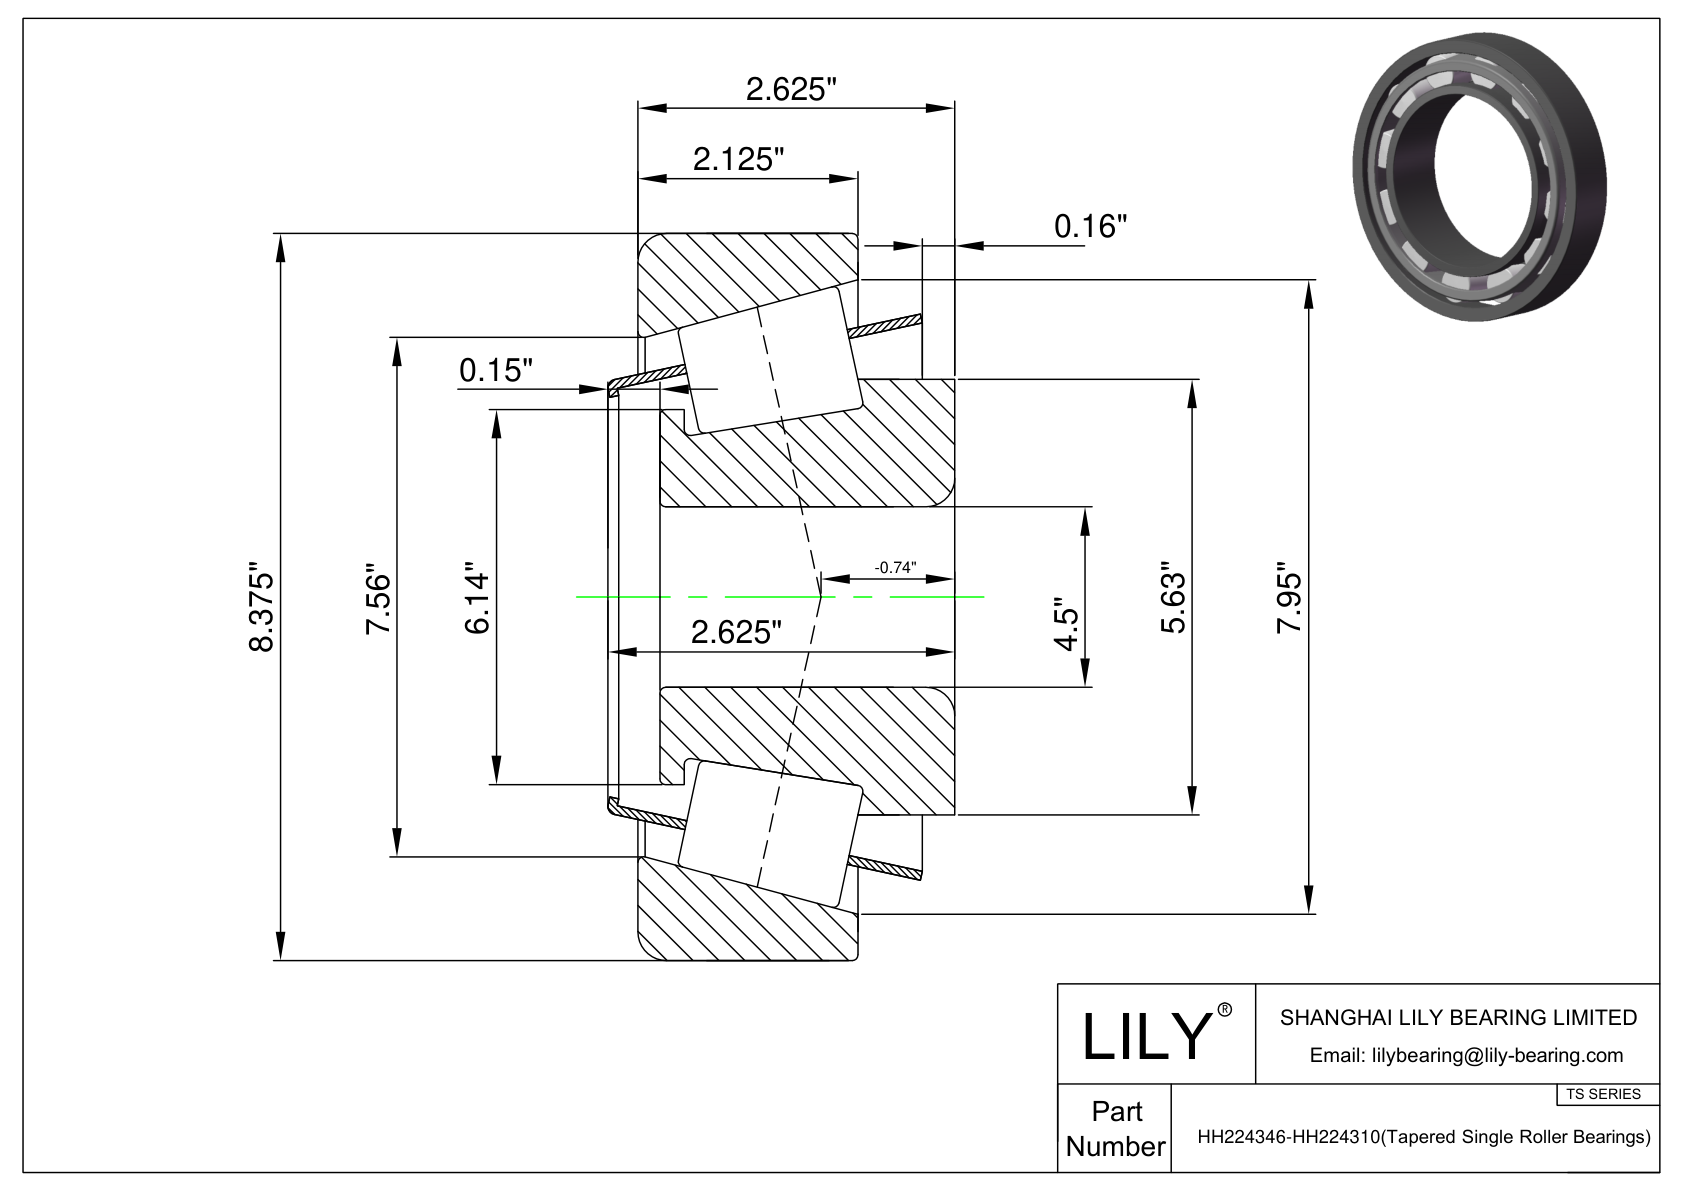 HH224346-HH224310 TS (Tapered Single Roller Bearings) (Imperial) cad drawing